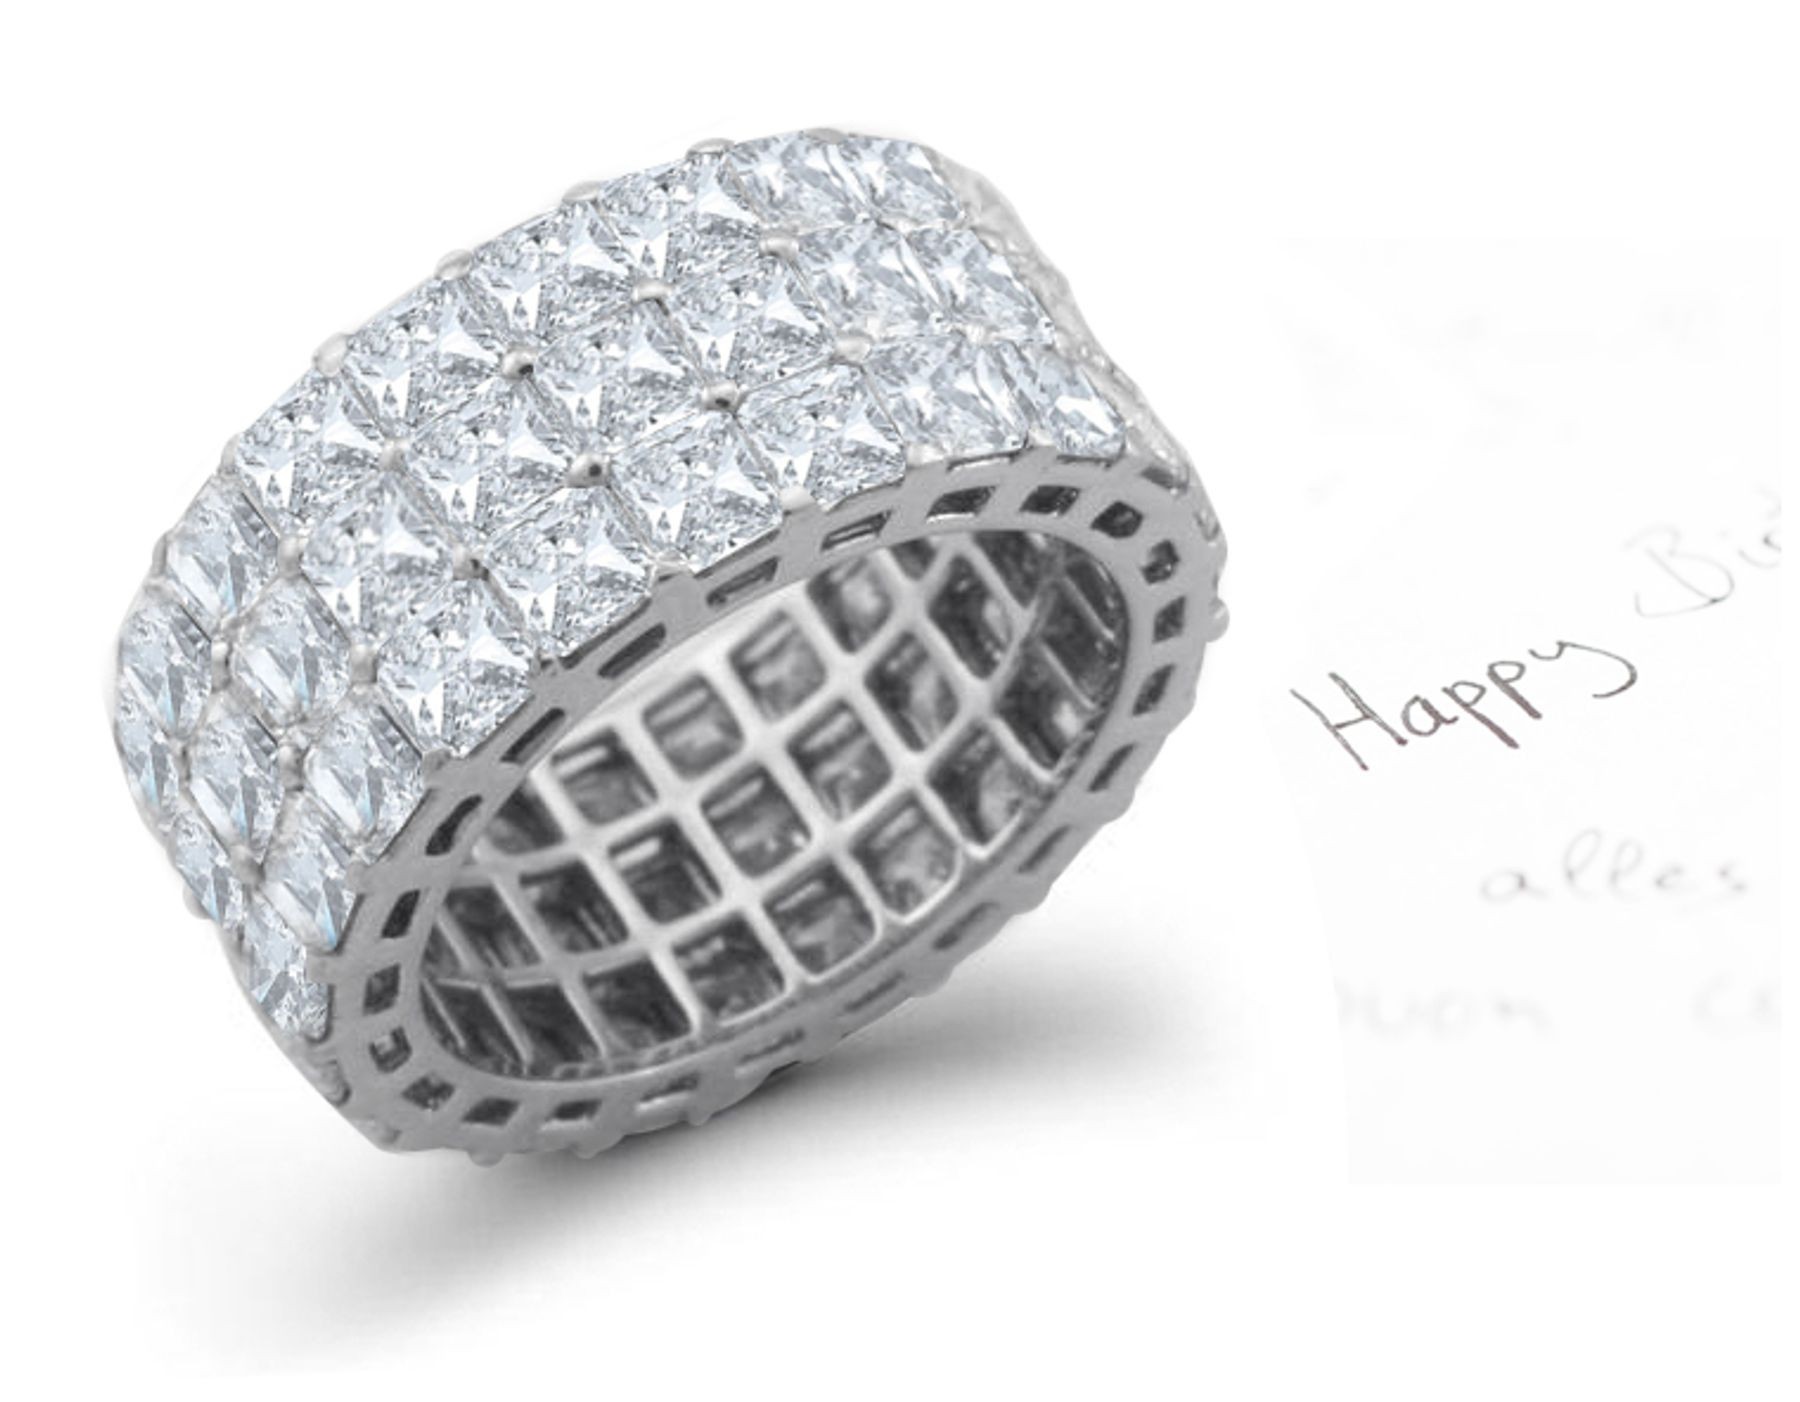 Princess Cut Diamond Cocktail Ring with Three Sparkling Rows of Diamond in Platinum & Gold